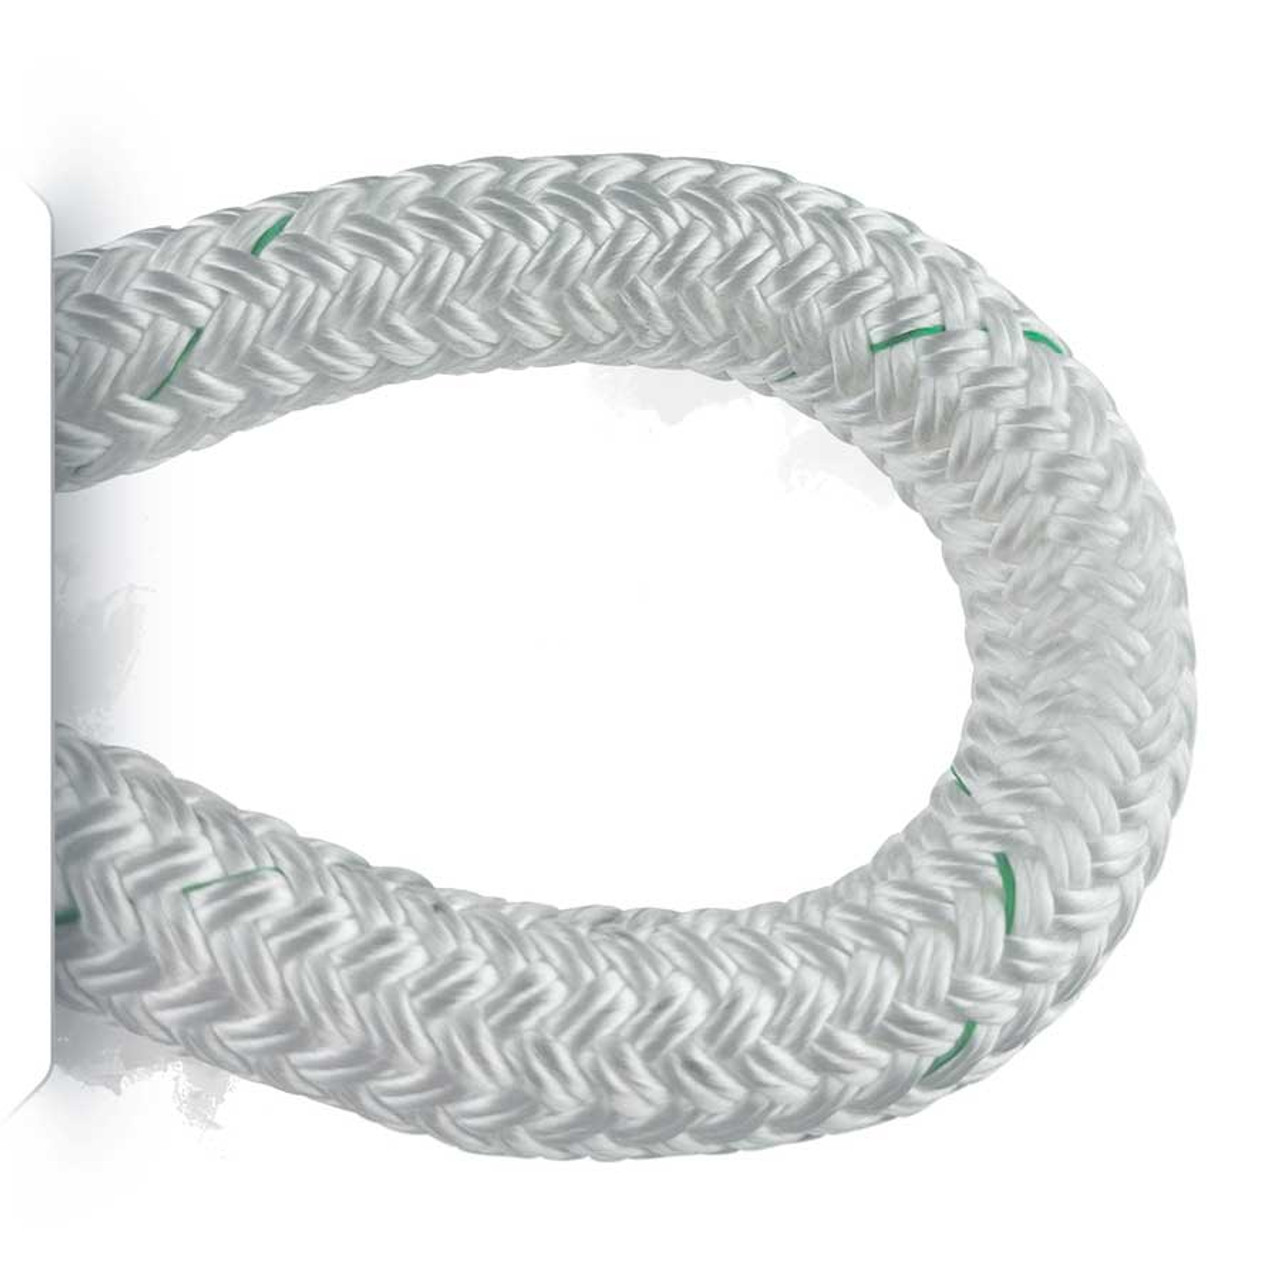 Load Pro™ Synthetic Winch Rope & Cable Pulling Rope - 3/8 by Pelican Rope  - Industrial, Utility, & Marine